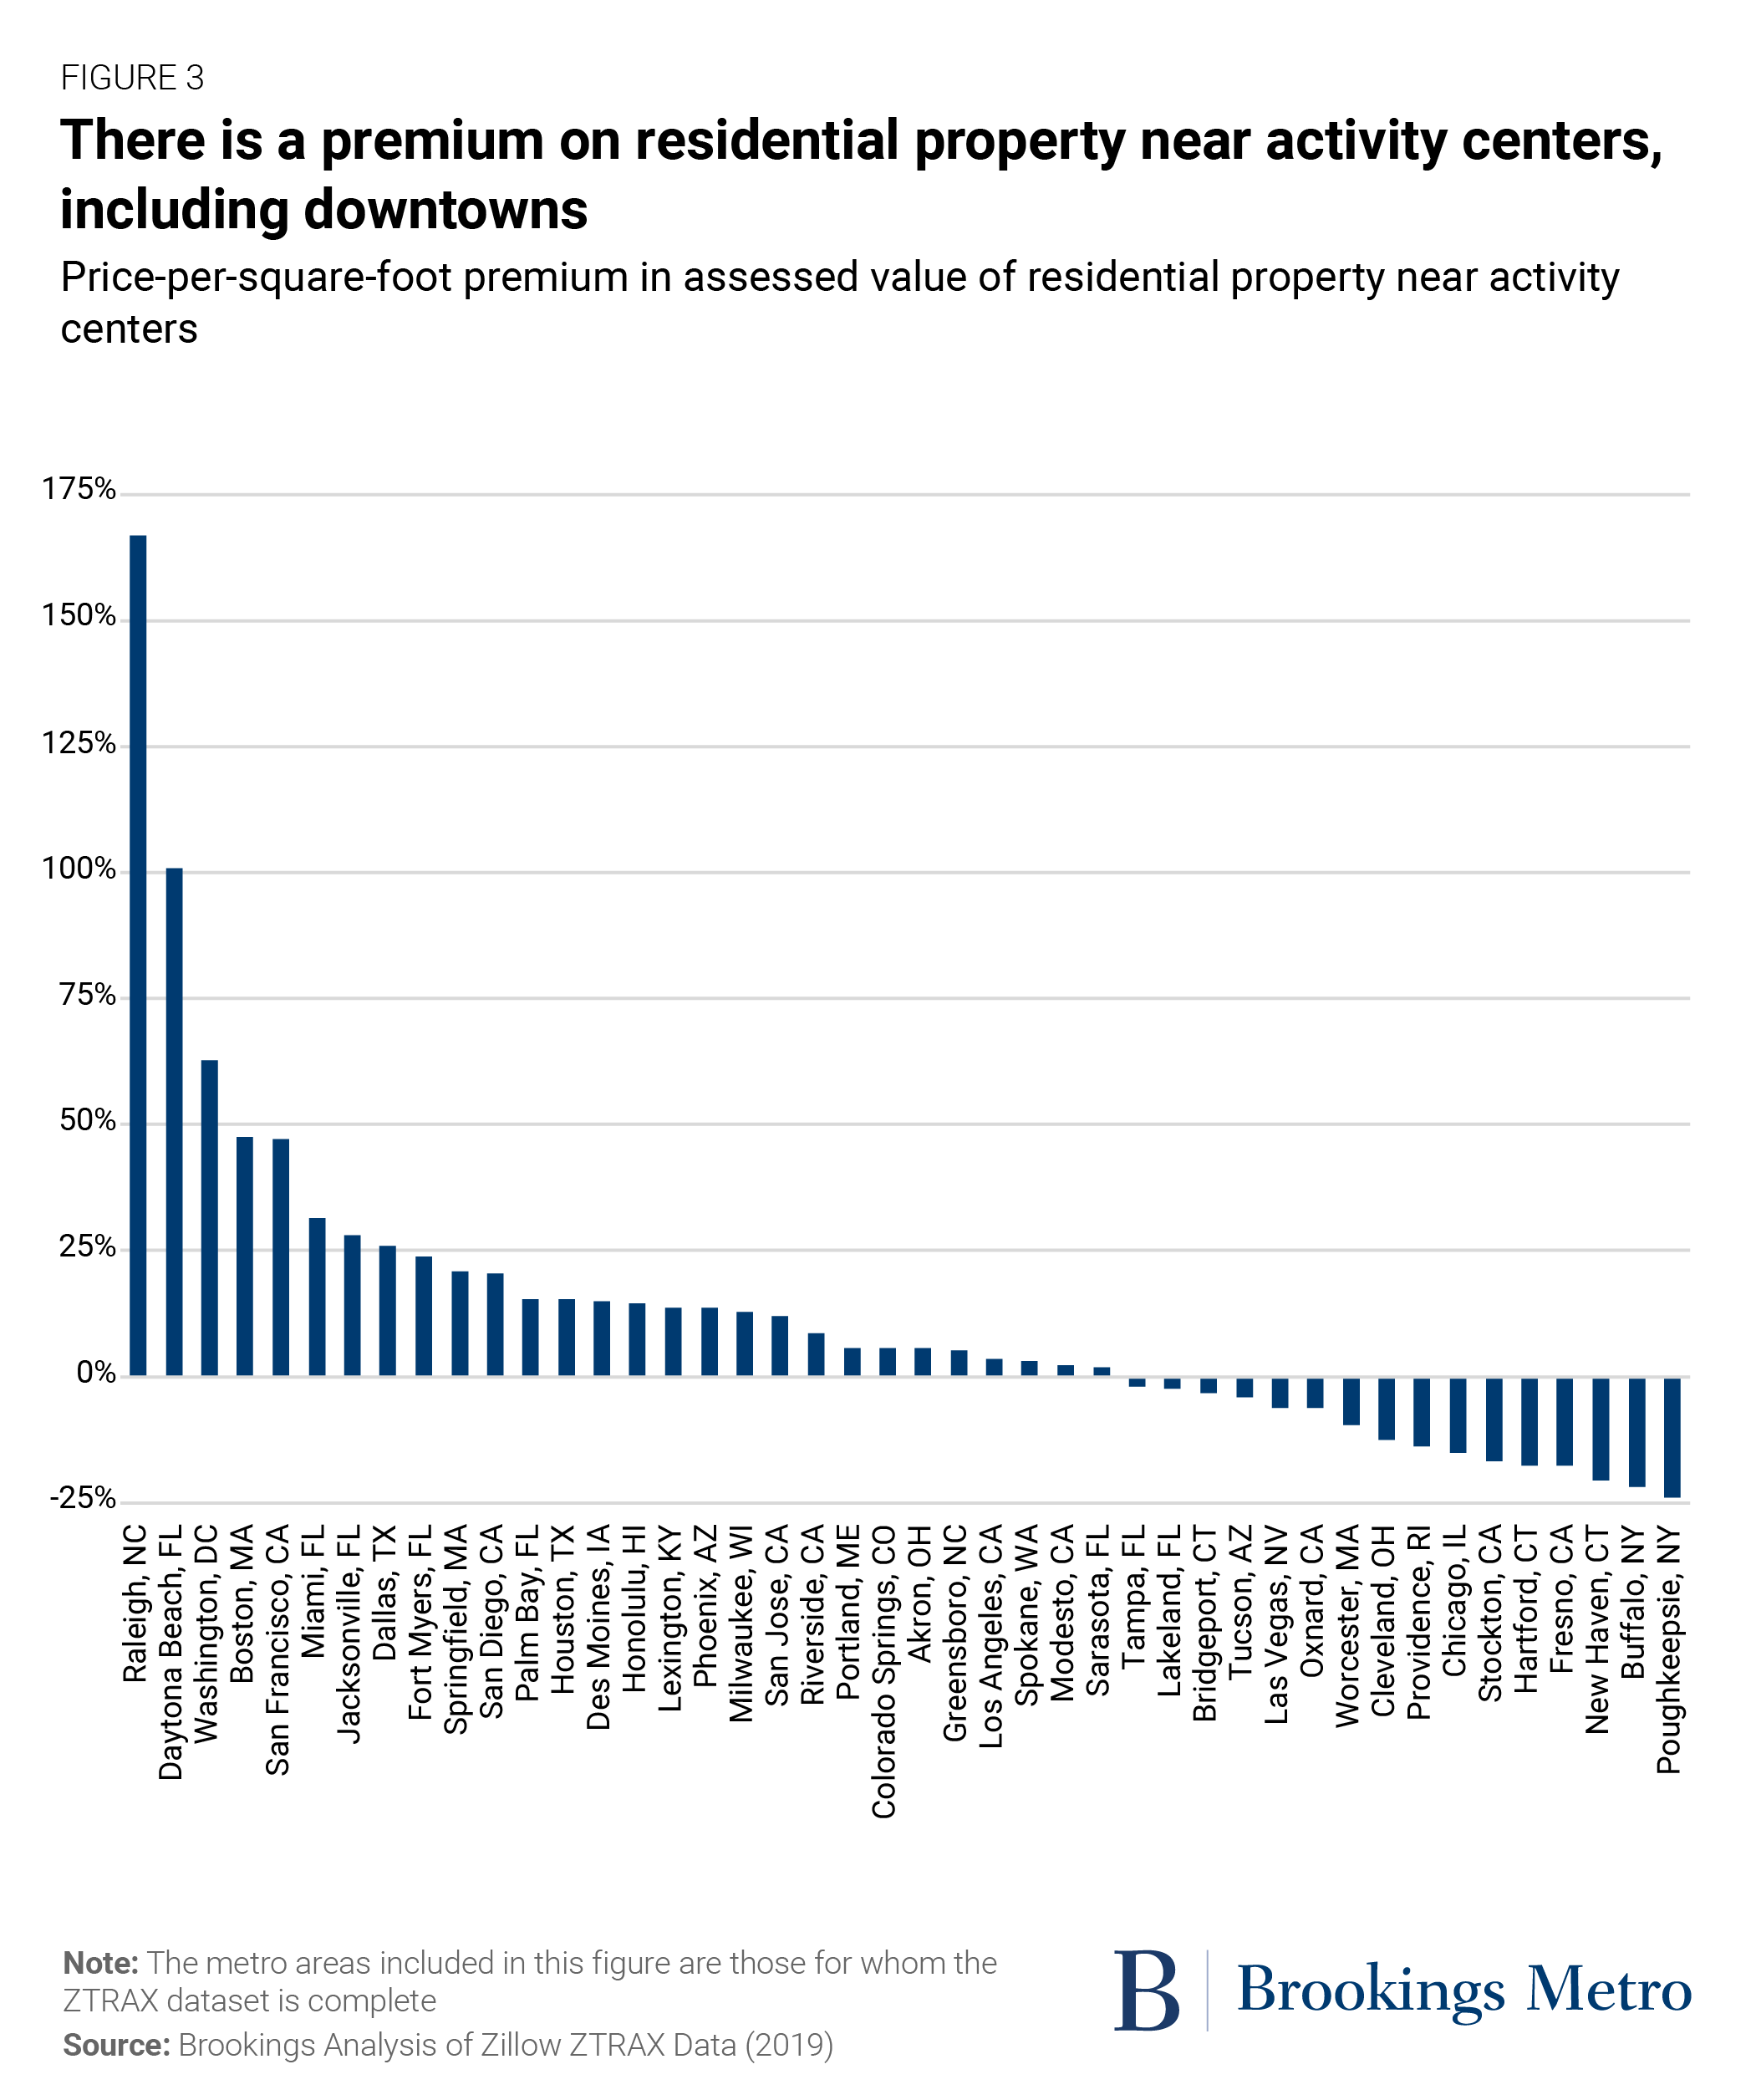 Figure 3: There is a premium on residential property near activity centers, including downtowns and major office districts